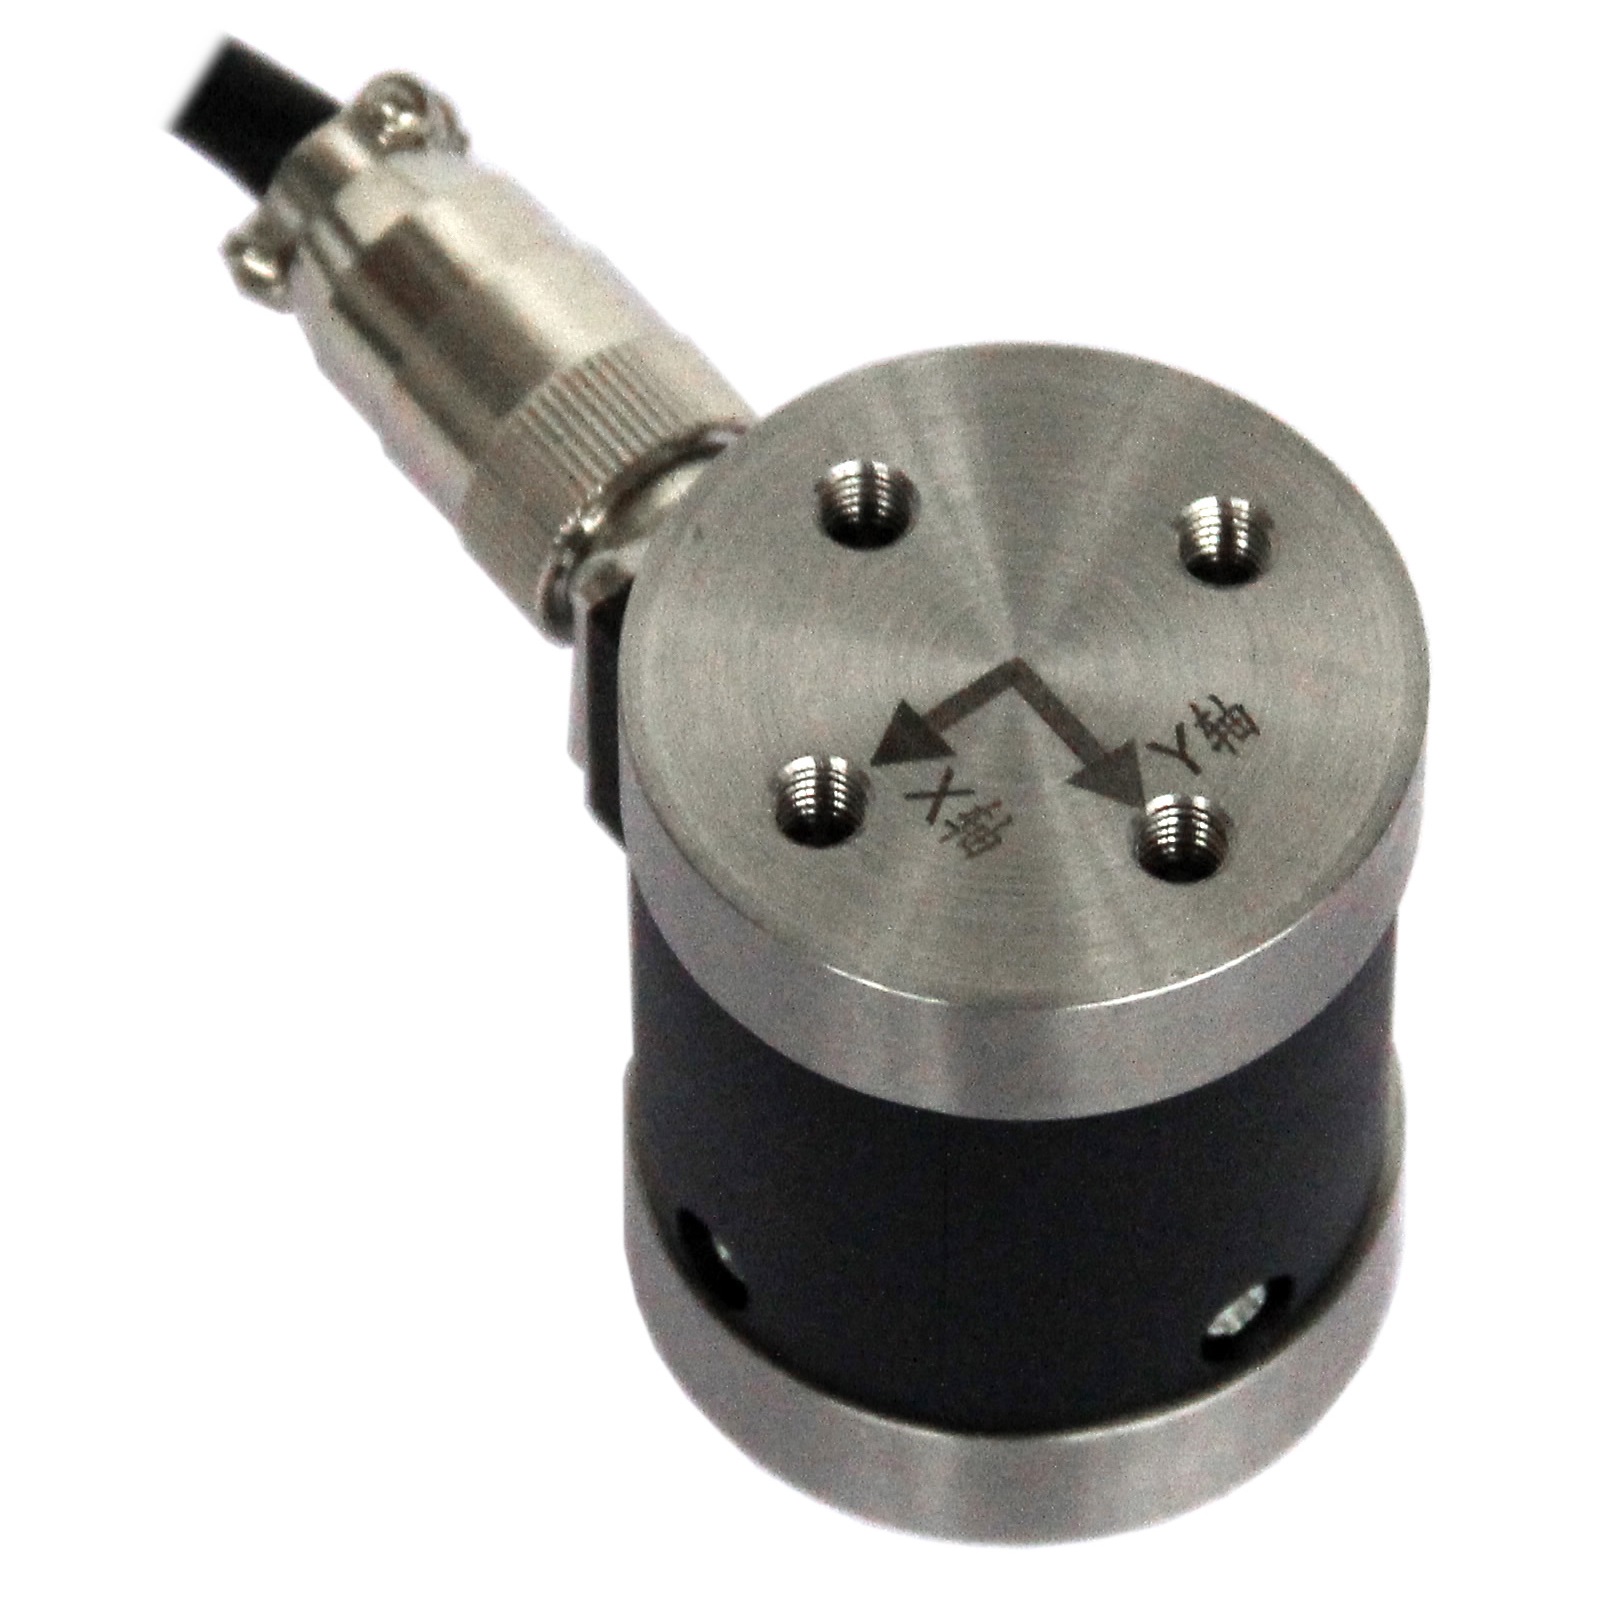 LCX2002 Multi-Axis Force Torque Sensors 2 Axis Compression And Torque Force Sensor